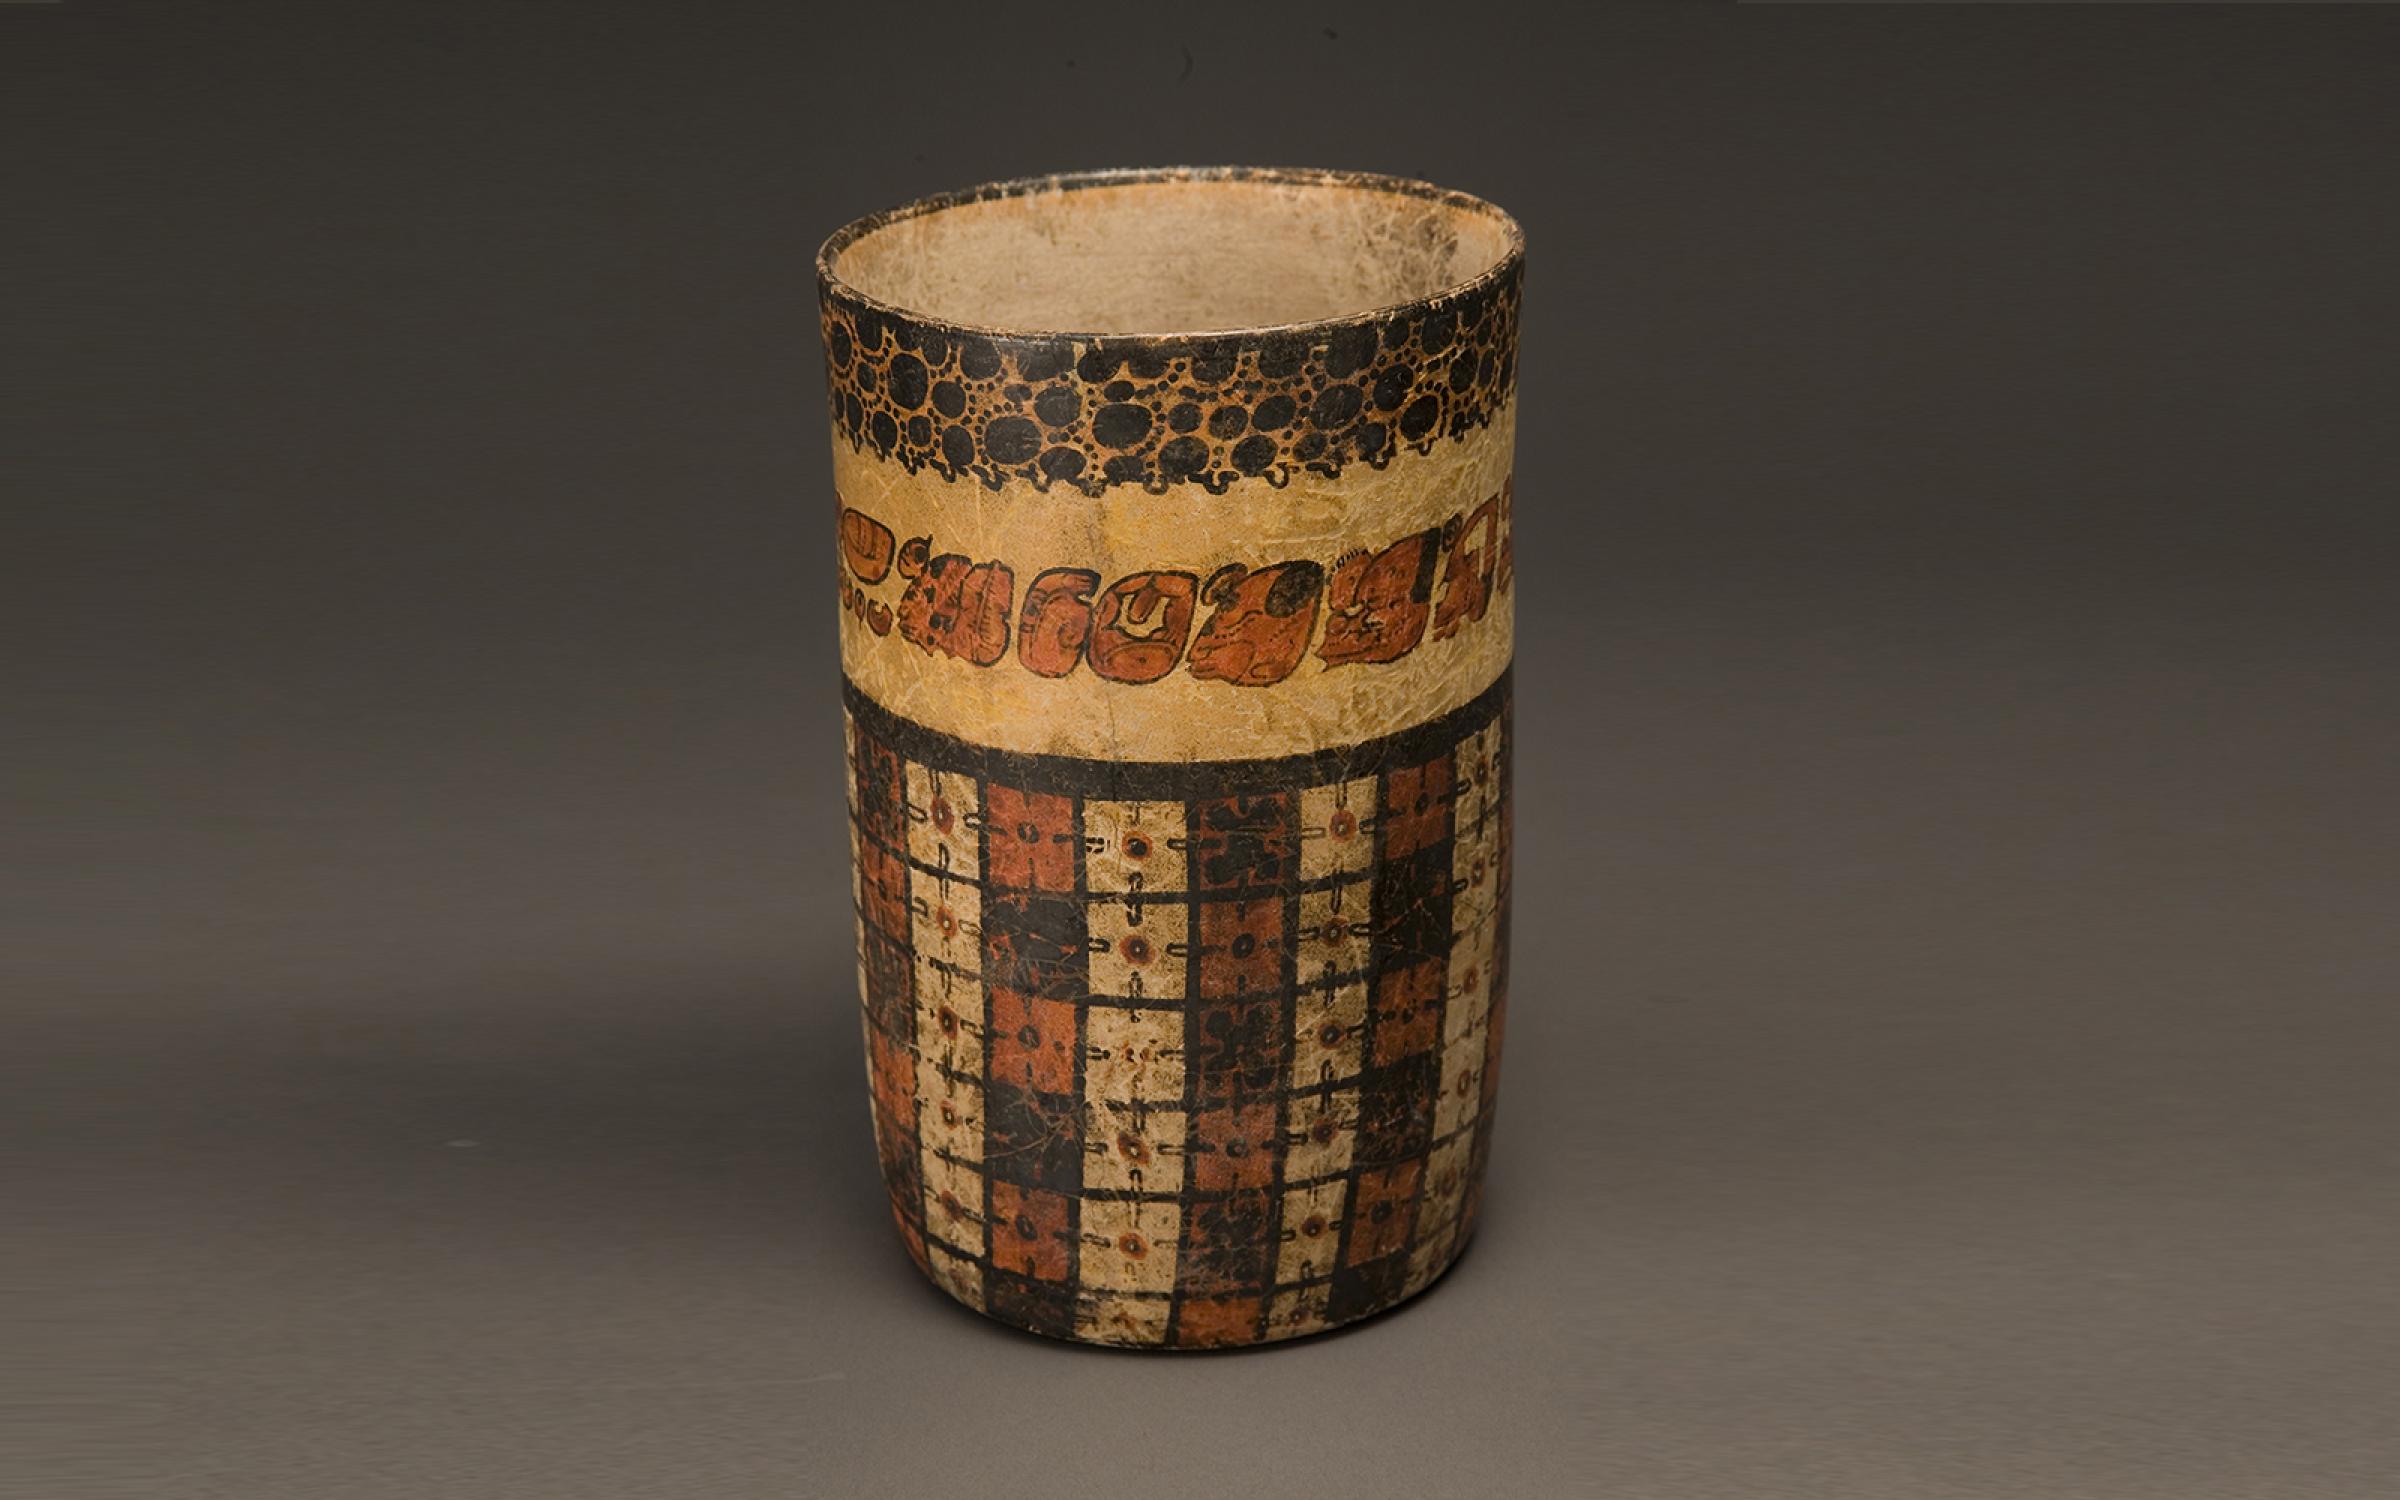 Guatemala, Peten region, Maya Culture, Vase with Glyphs, Late Classic Period (600-900), earthenware and pigment, purchased with funds from Friends of the Art Museum, UMFA1984.003